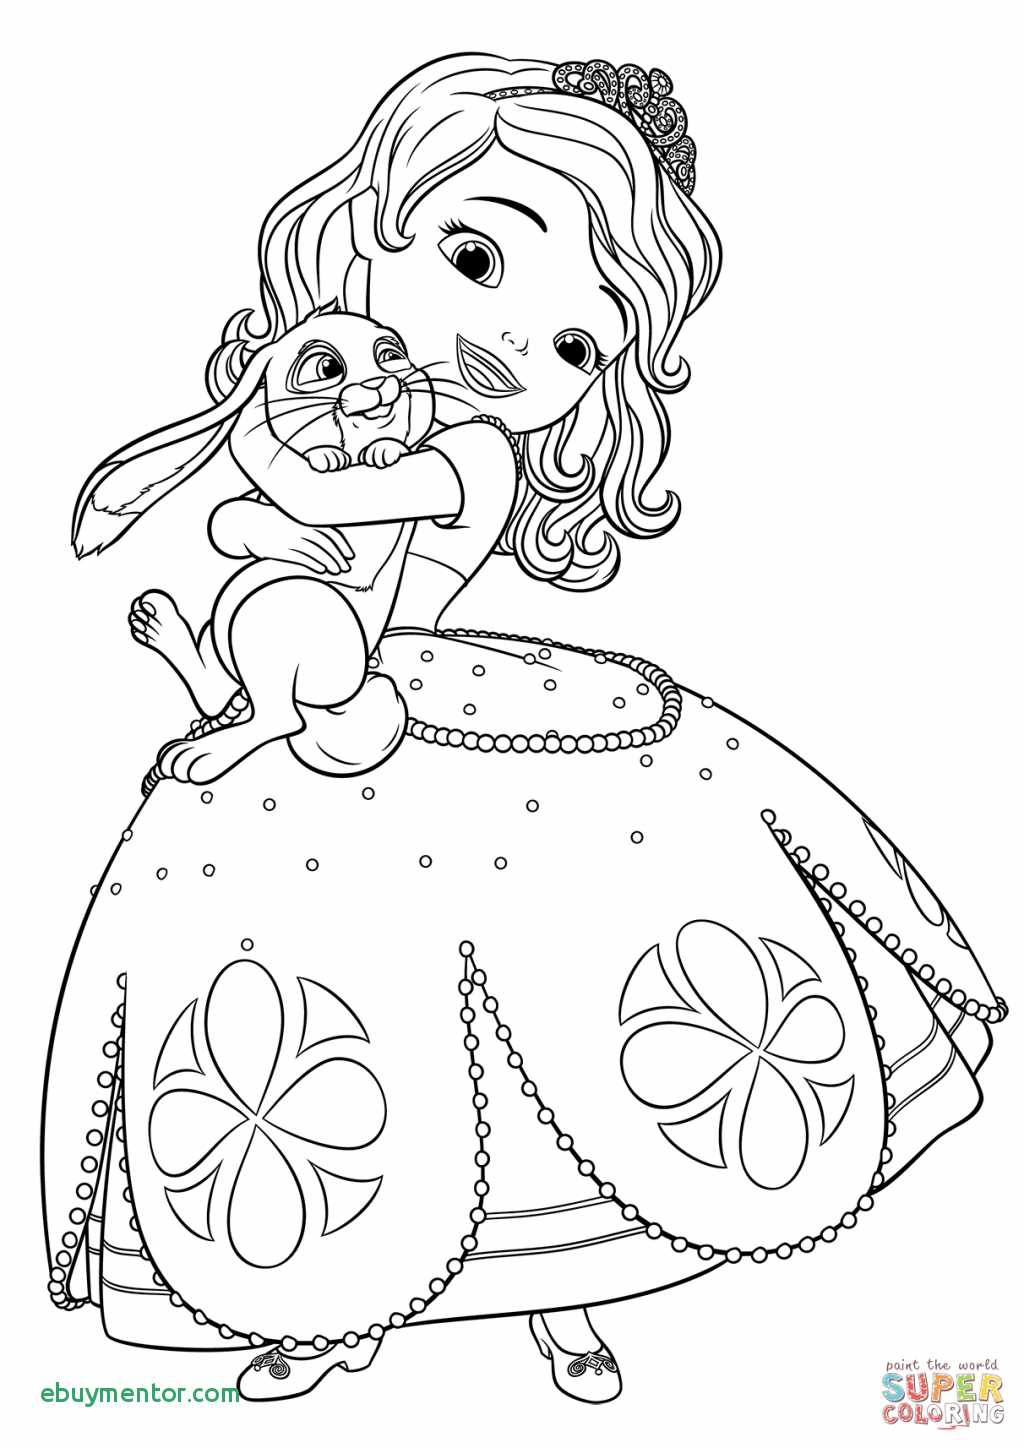 Sofia Coloring Pages Highest Clarity the First Colouring to Beautiful Princess Printable Coloring Pages Free